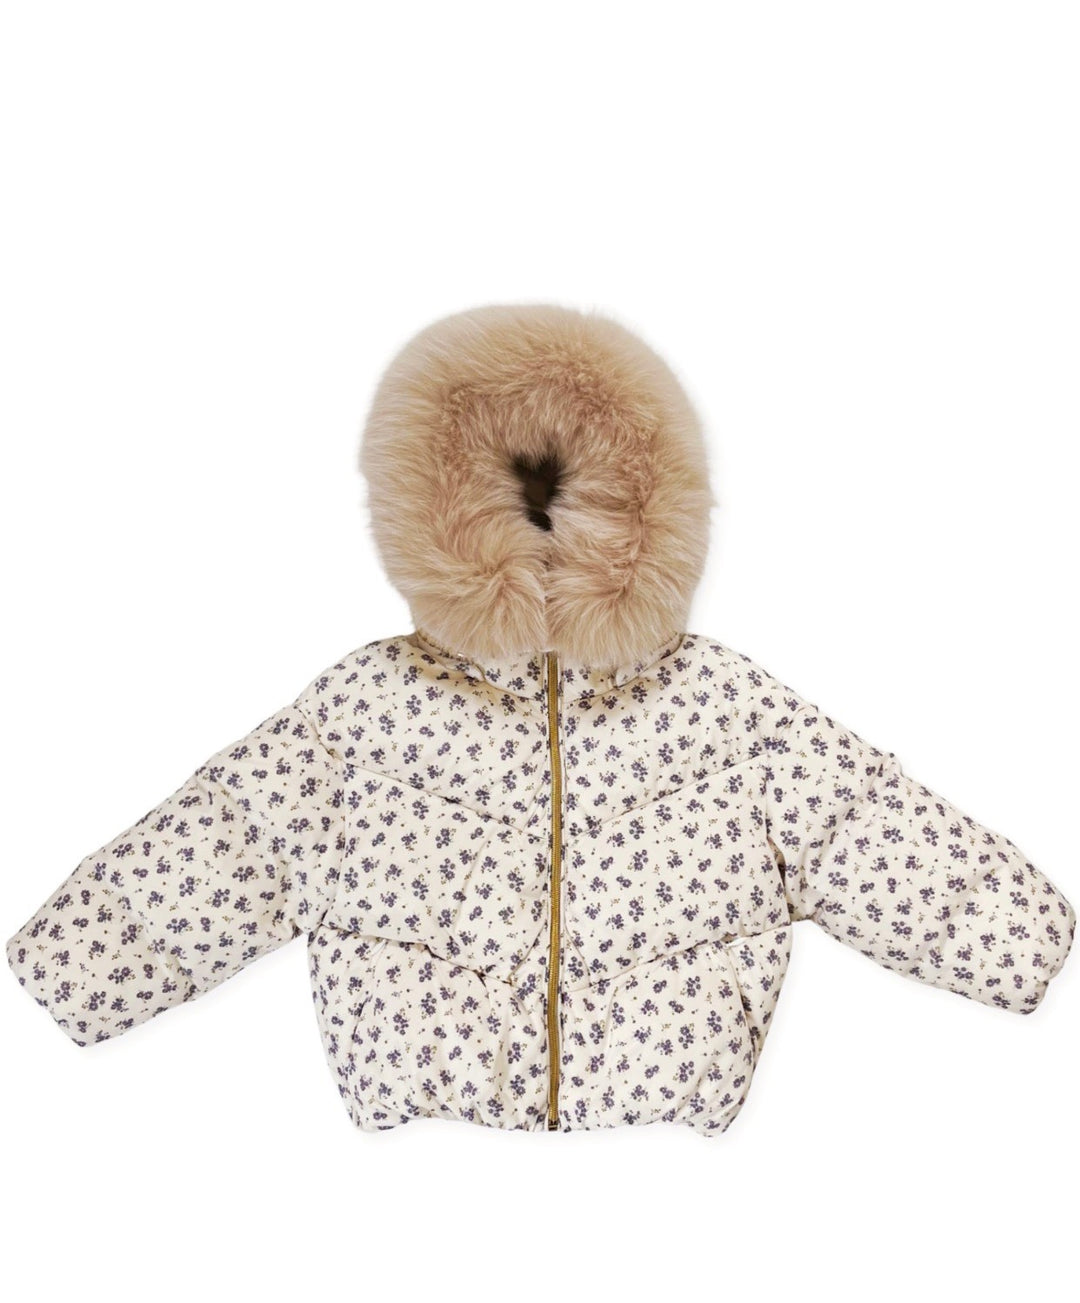 HAILEY FLORAL PAMPLE MOUSSE PUFFER JACKET